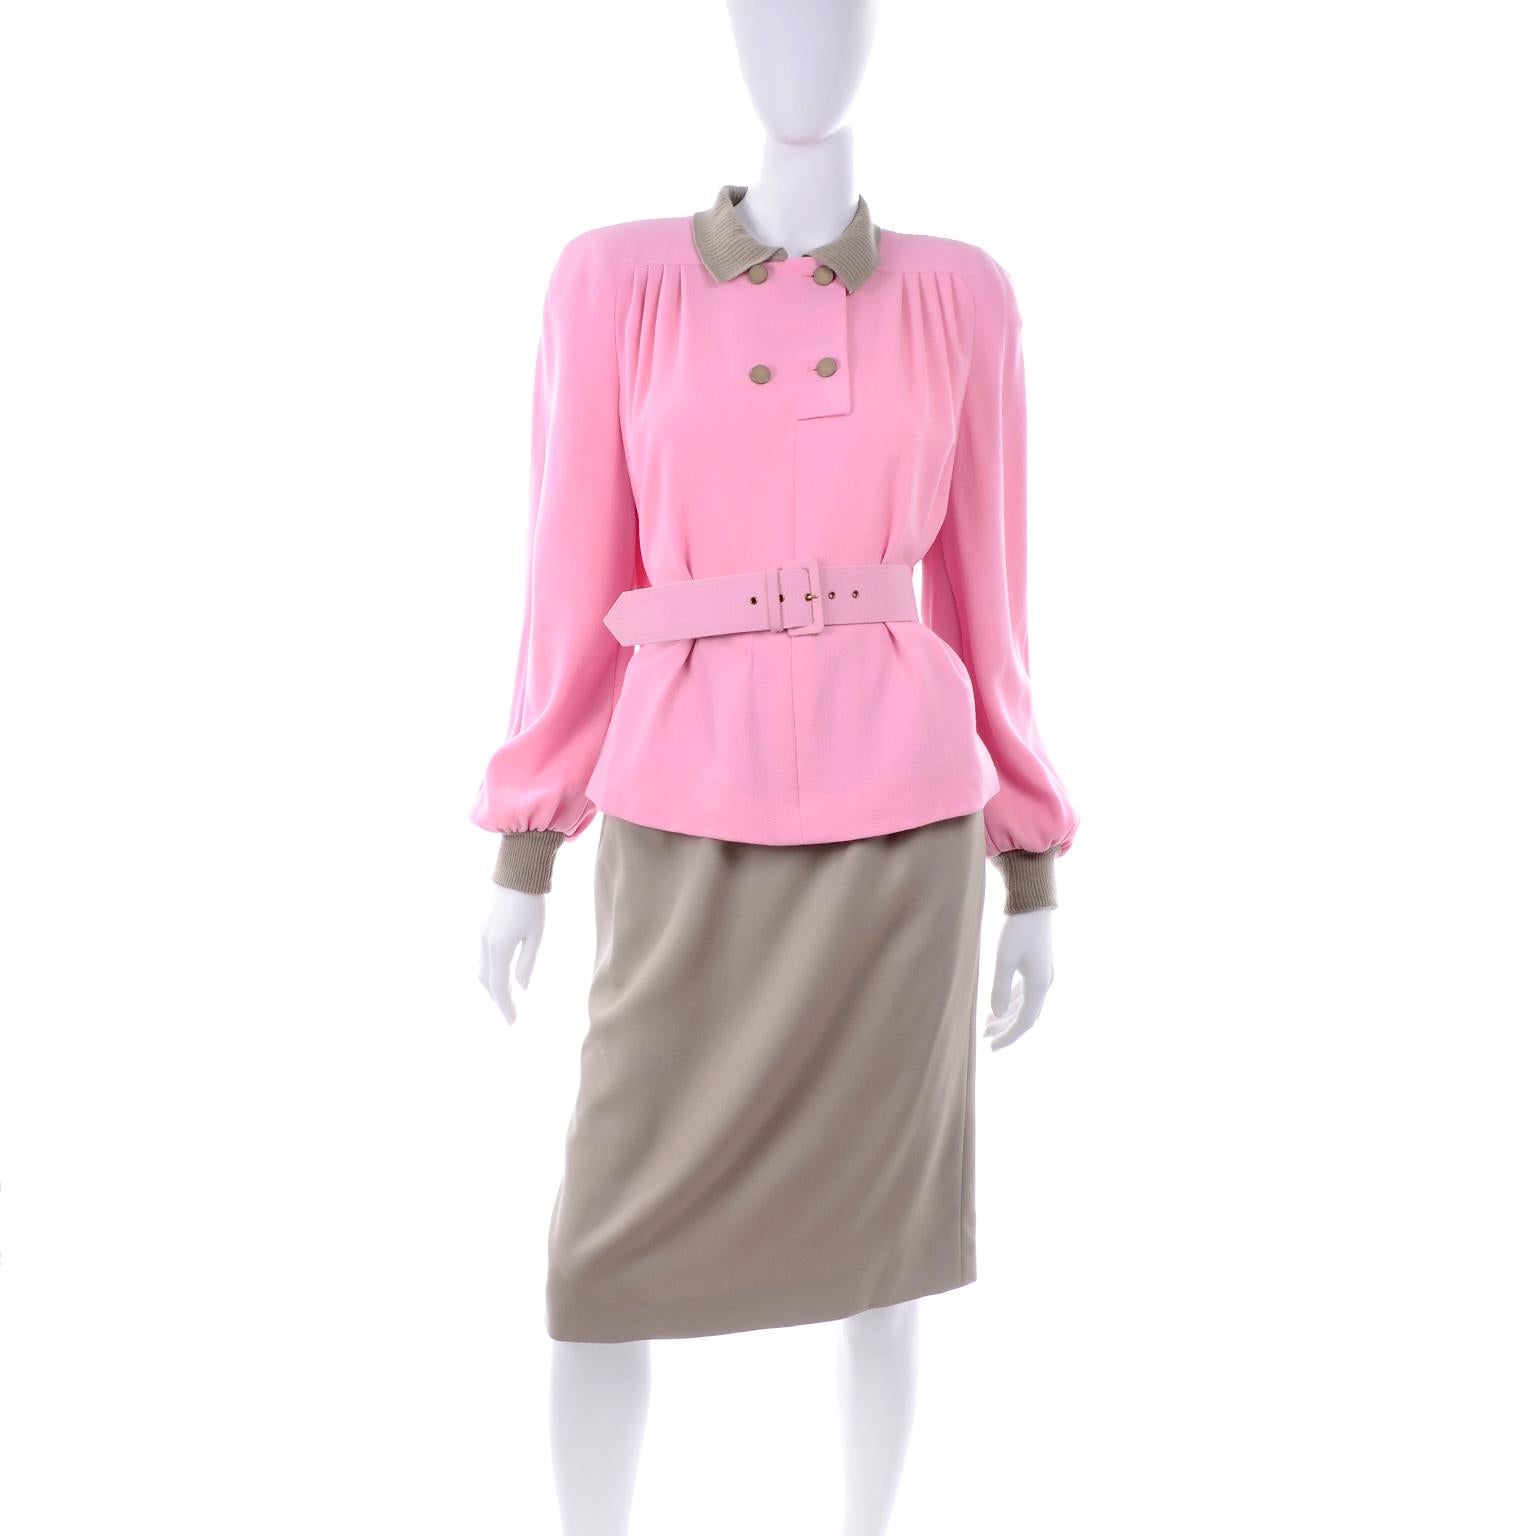 Beige 1984 Runway Vintage Valentino Boutique 2pc Skirt Top Outfit Pink & Camel Size 8